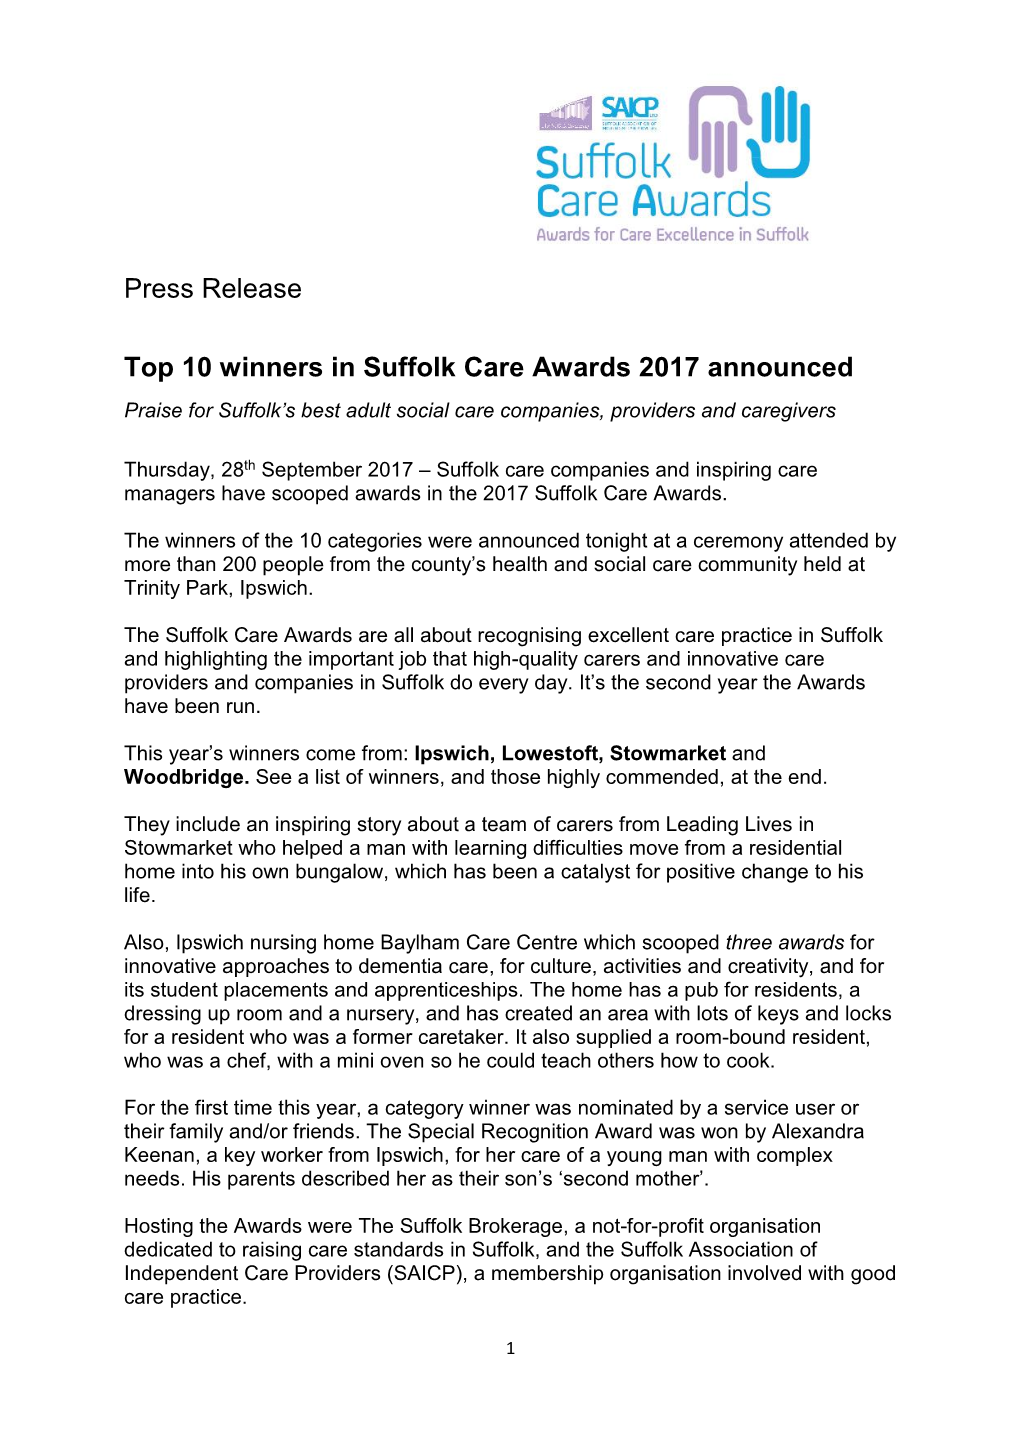 Press Release Top 10 Winners in Suffolk Care Awards 2017 Announced